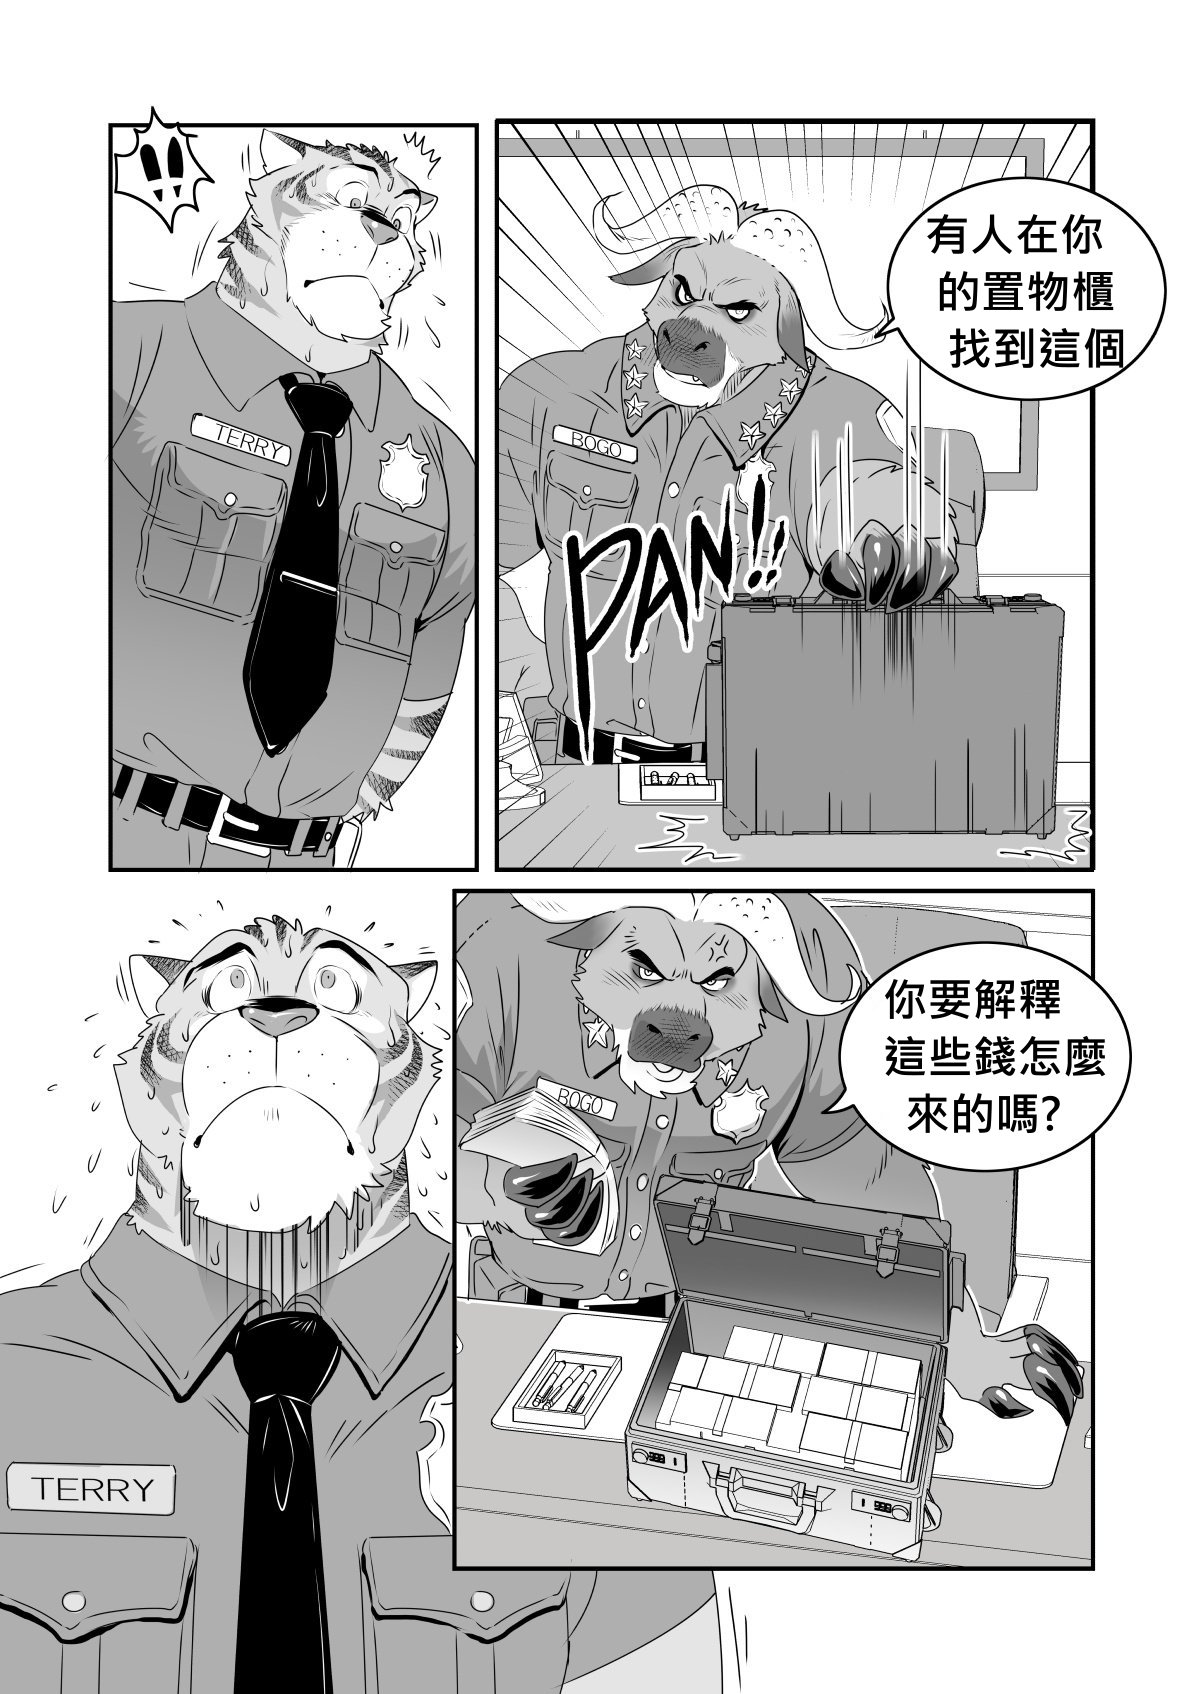 [Kuma Hachi] chief bogo found a dirty police (fixed version) [Chinese] 